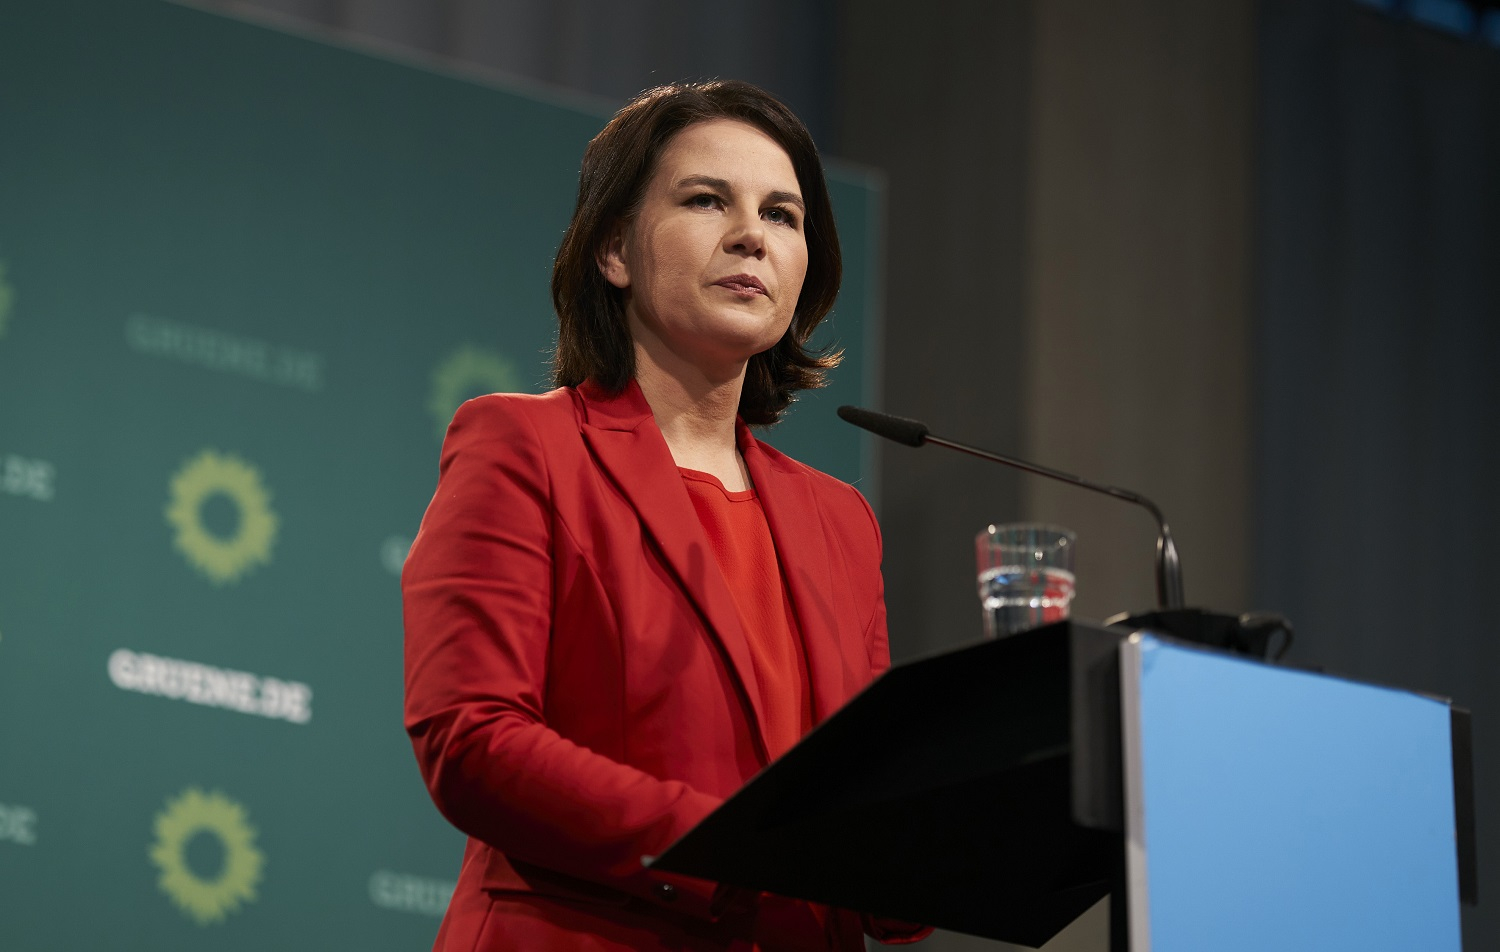 Annalena Baerbock, chancellor candidate of the German Greens party, speaks to the media at the Heinrich Böll Foundation on April 26, 2021 in Berlin, Germany. 